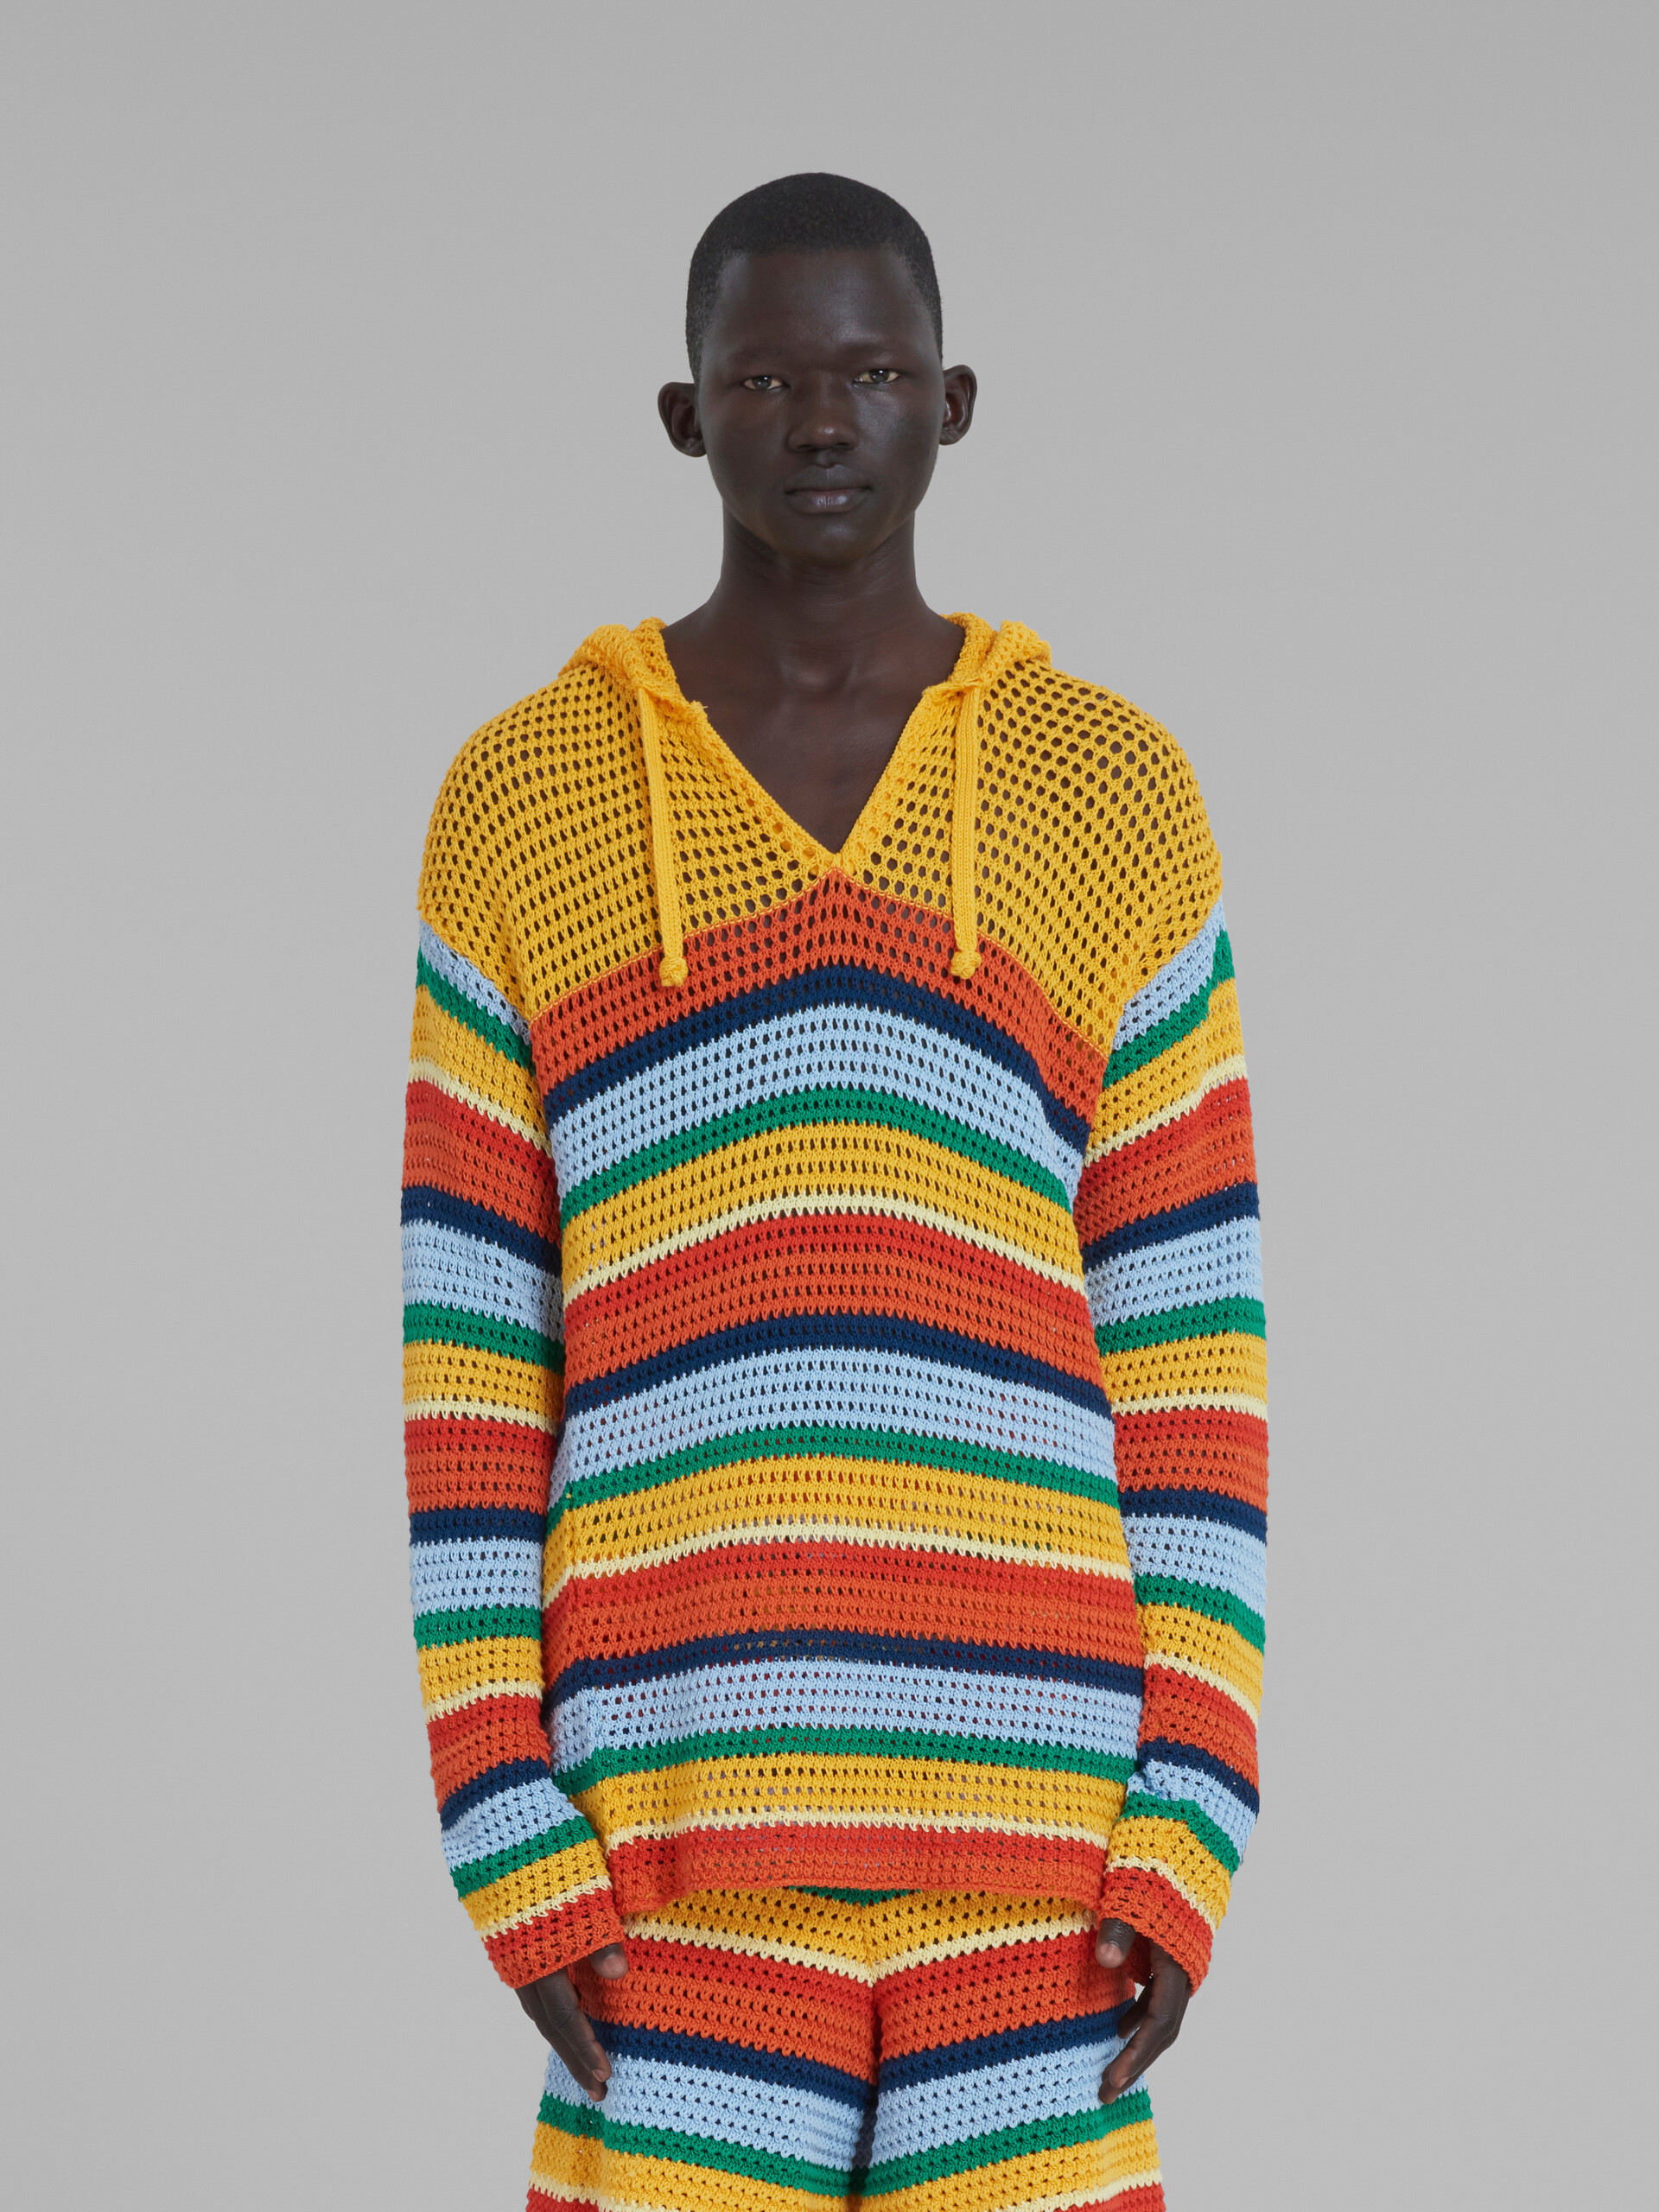 Marni x No Vacancy Inn - Multicolour cotton-knit hoodie - Pullovers - Image 2